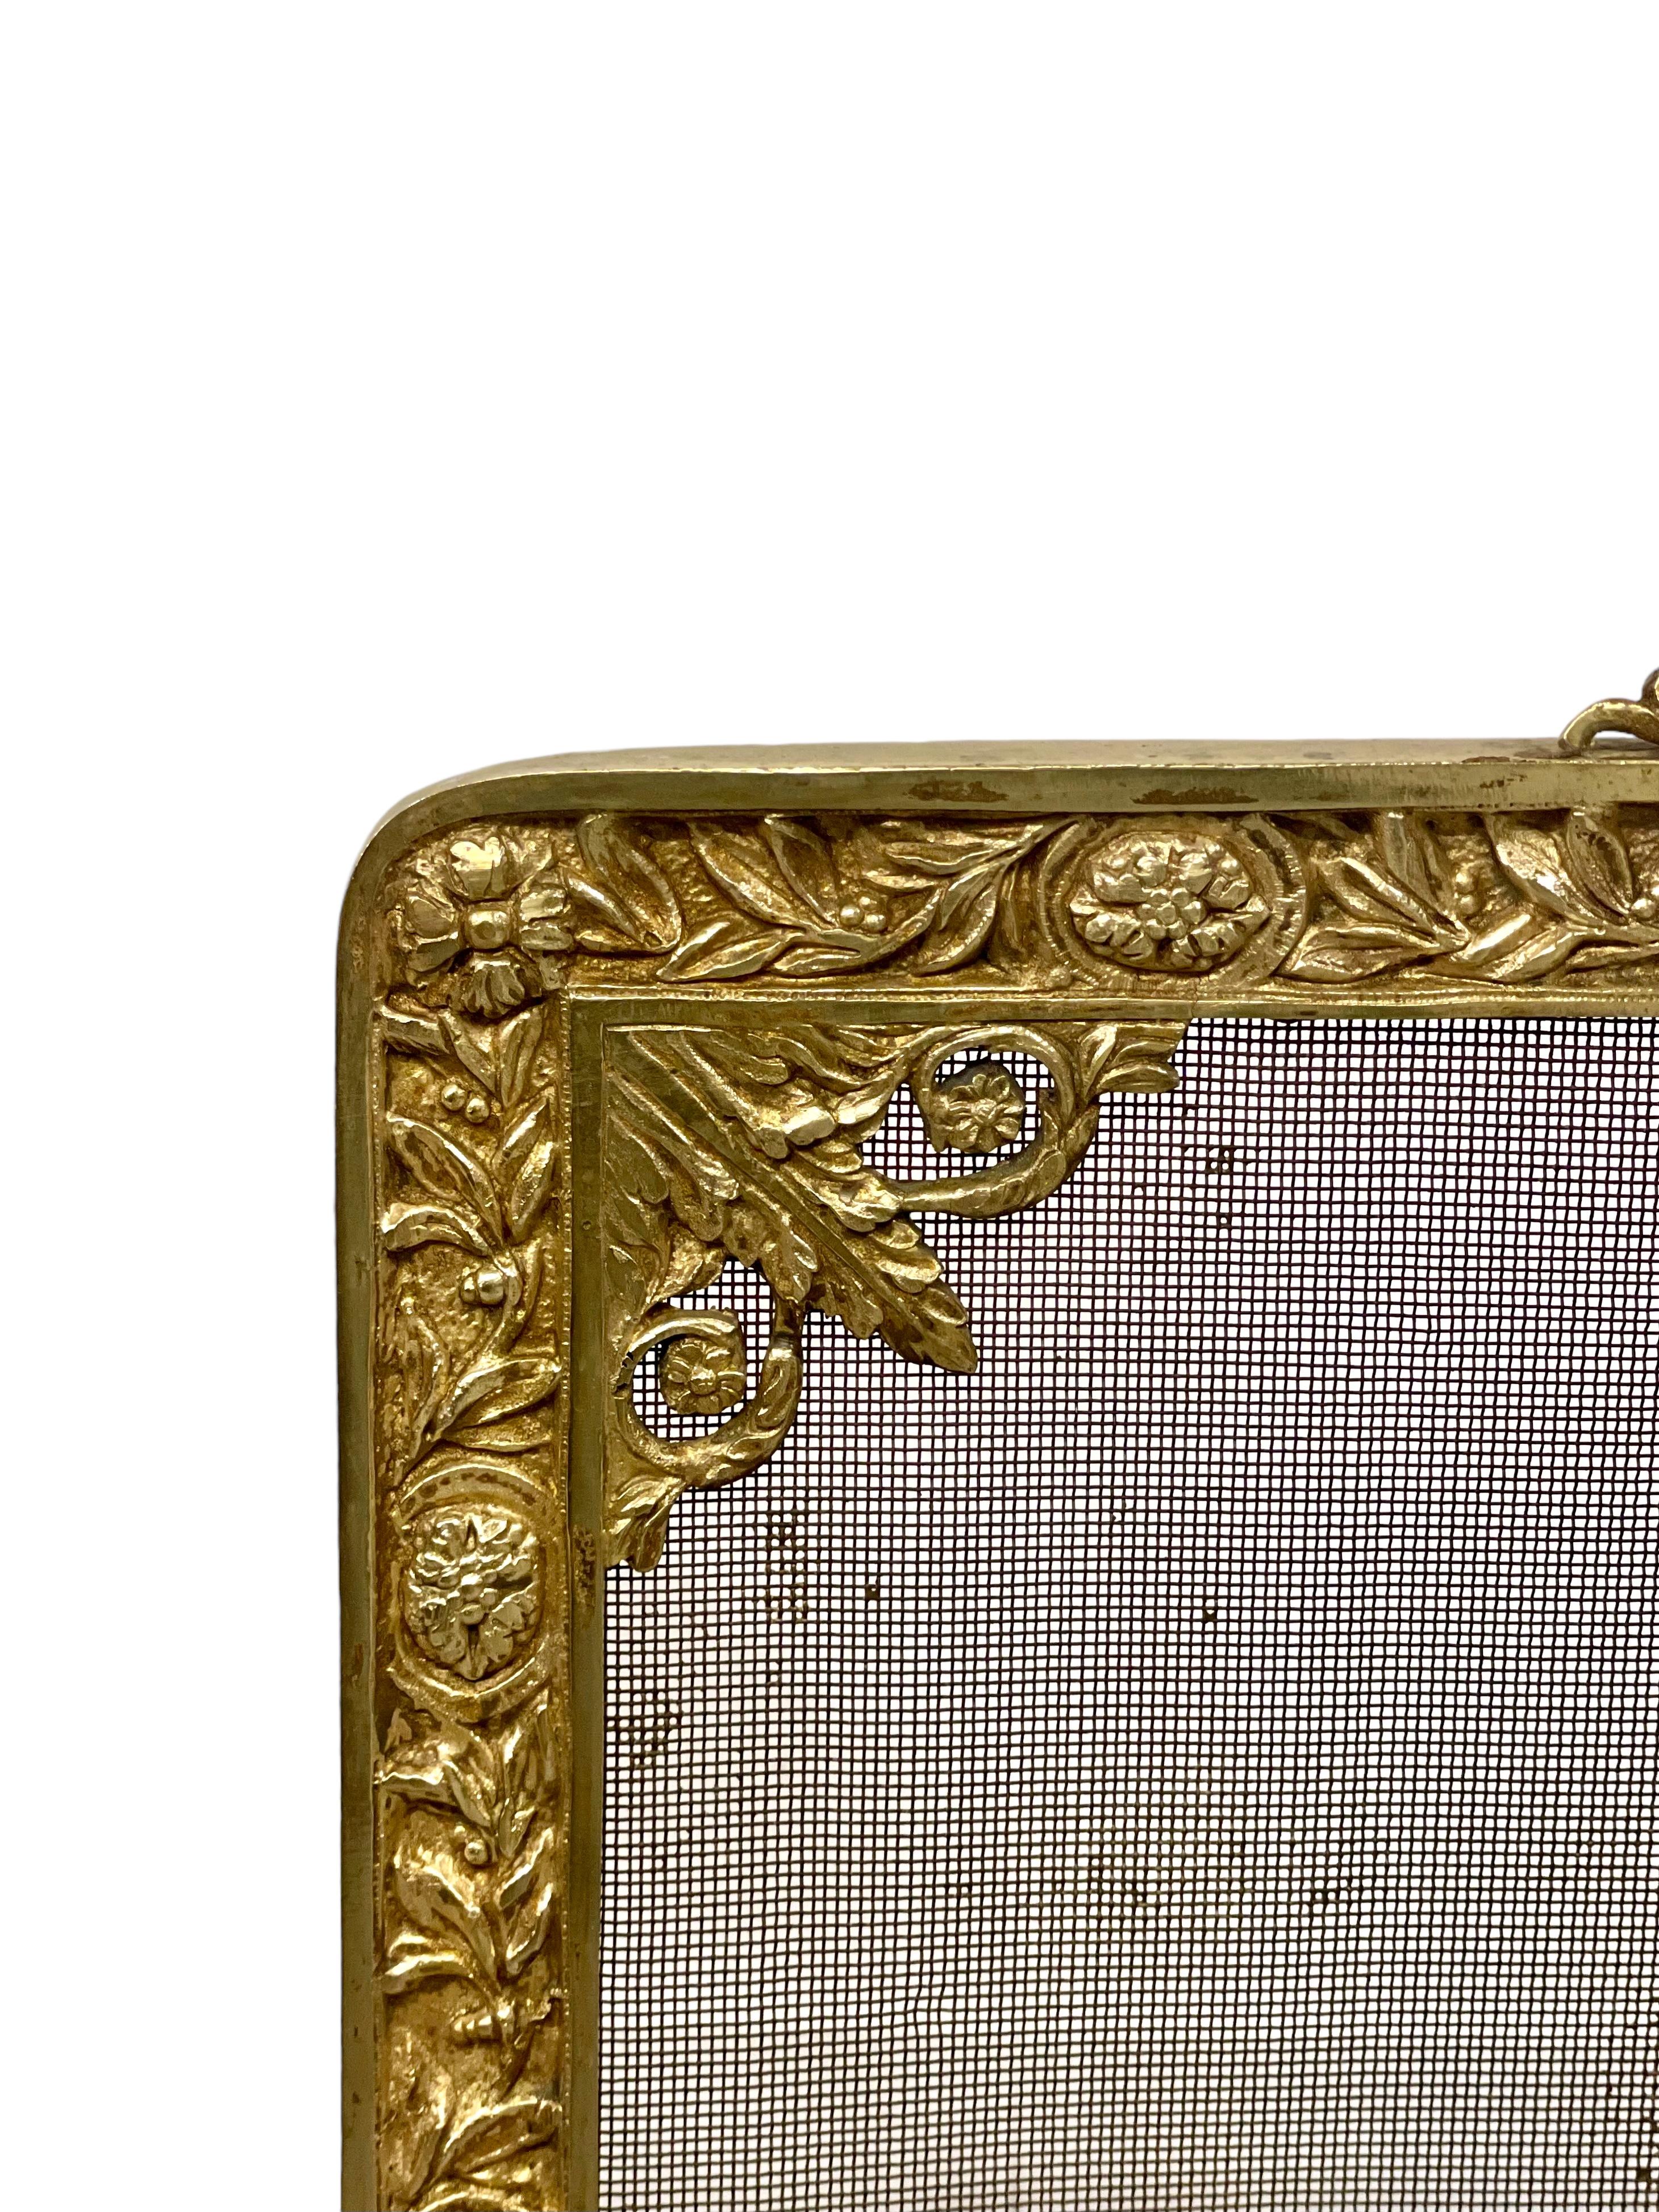 An elegant antique gilt bronze and mesh Louis XVI style fire guard, profusely decorated all round its square frame with ornate floral and foliage designs. The facade is formed from mesh wire, with a charming musically themed bronze centrepiece